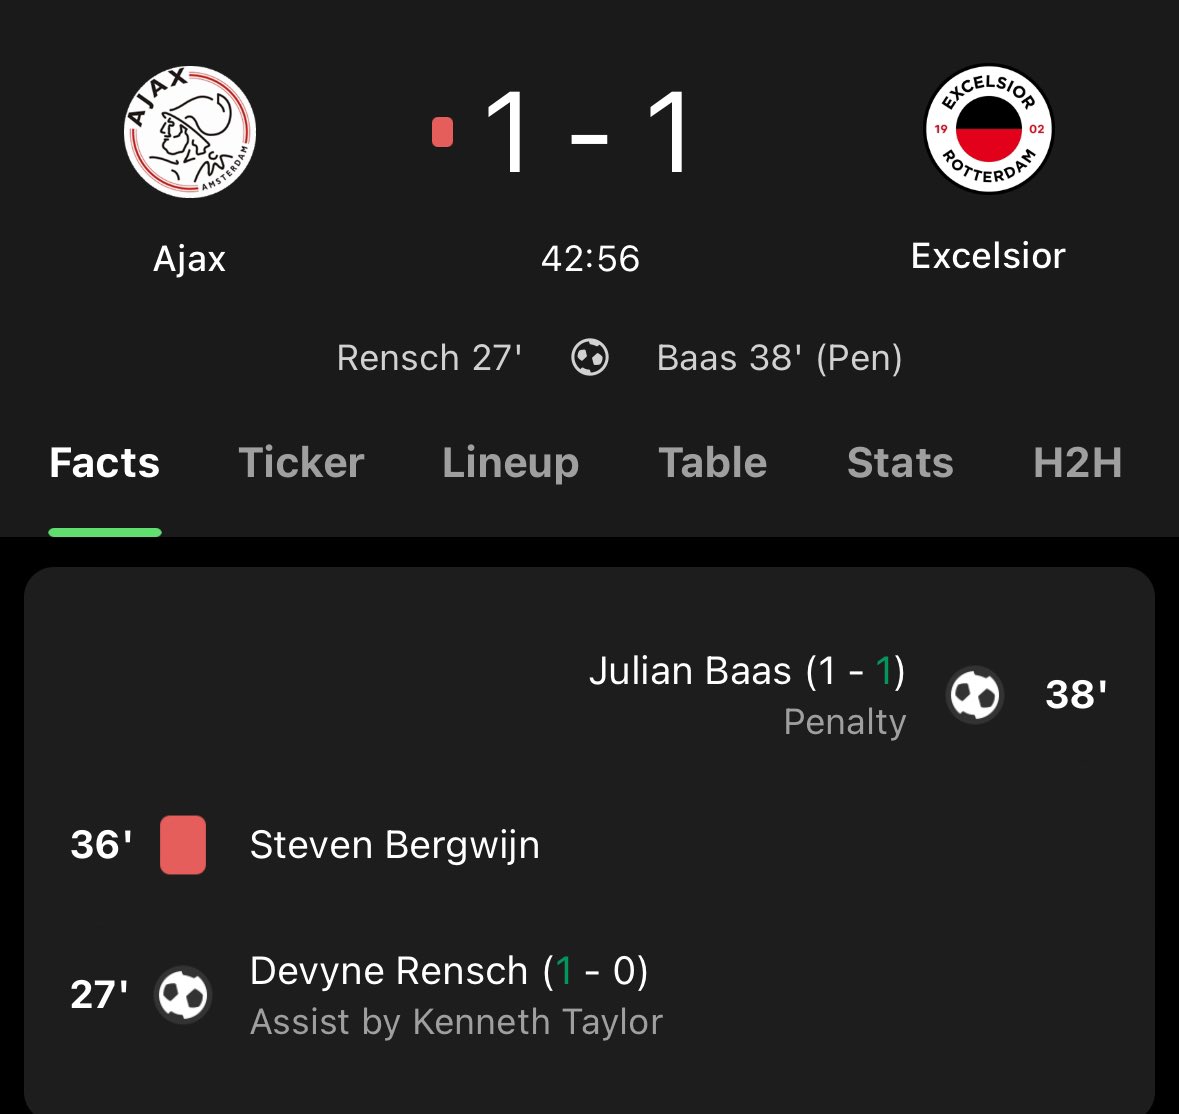 Let’s quickly check the score of Ajax-Excelsior while at the office. This must be an easy win given we’re playing against the 15th placed team at home! Oh… 🤣